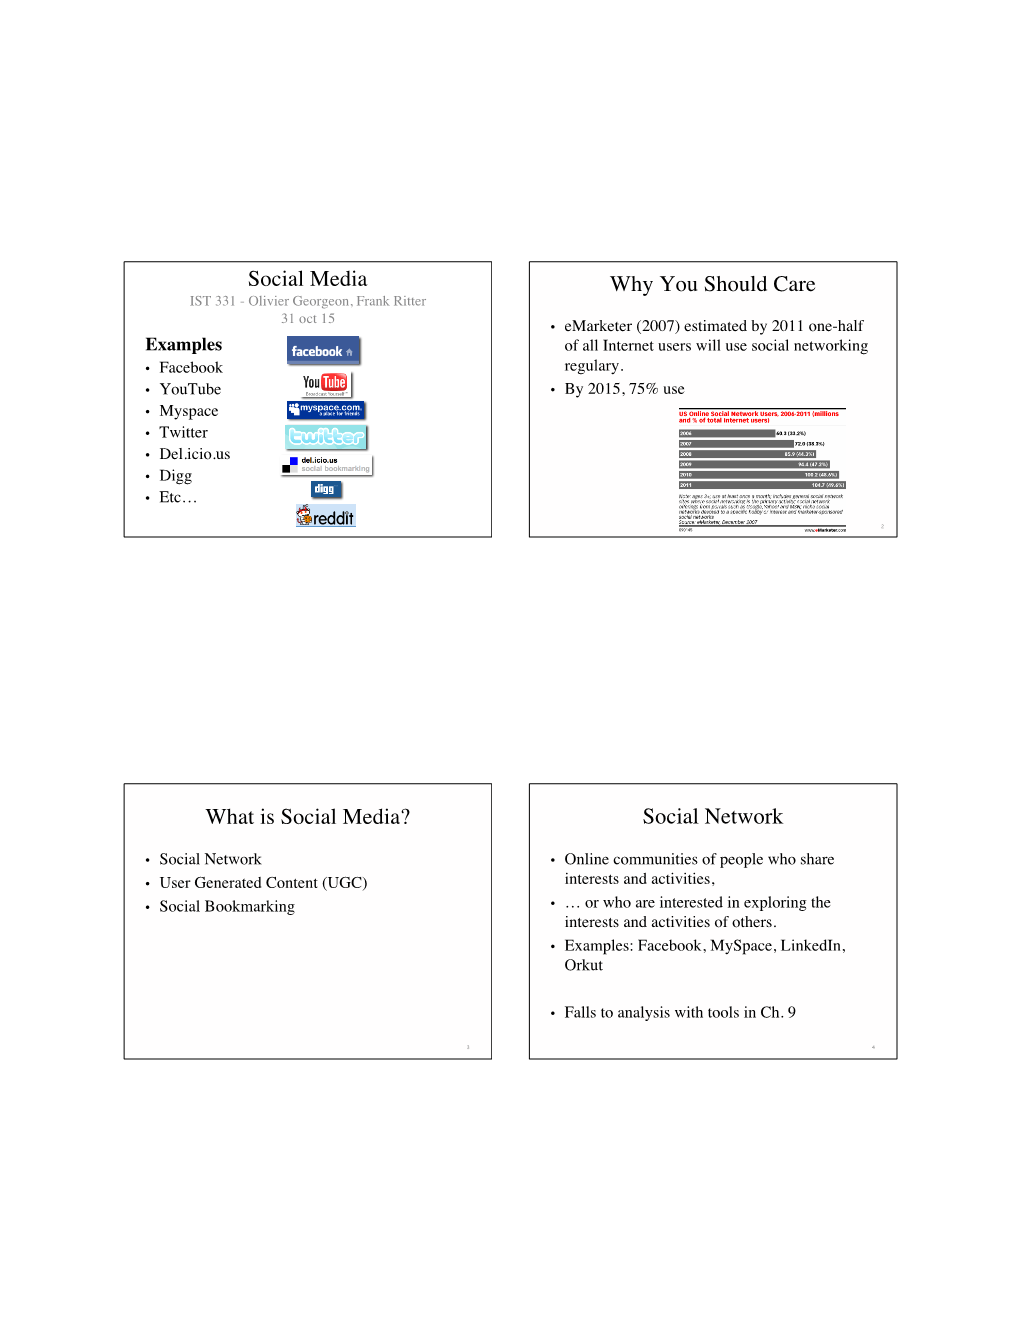 Social Media Why You Should Care What Is Social Media? Social Network